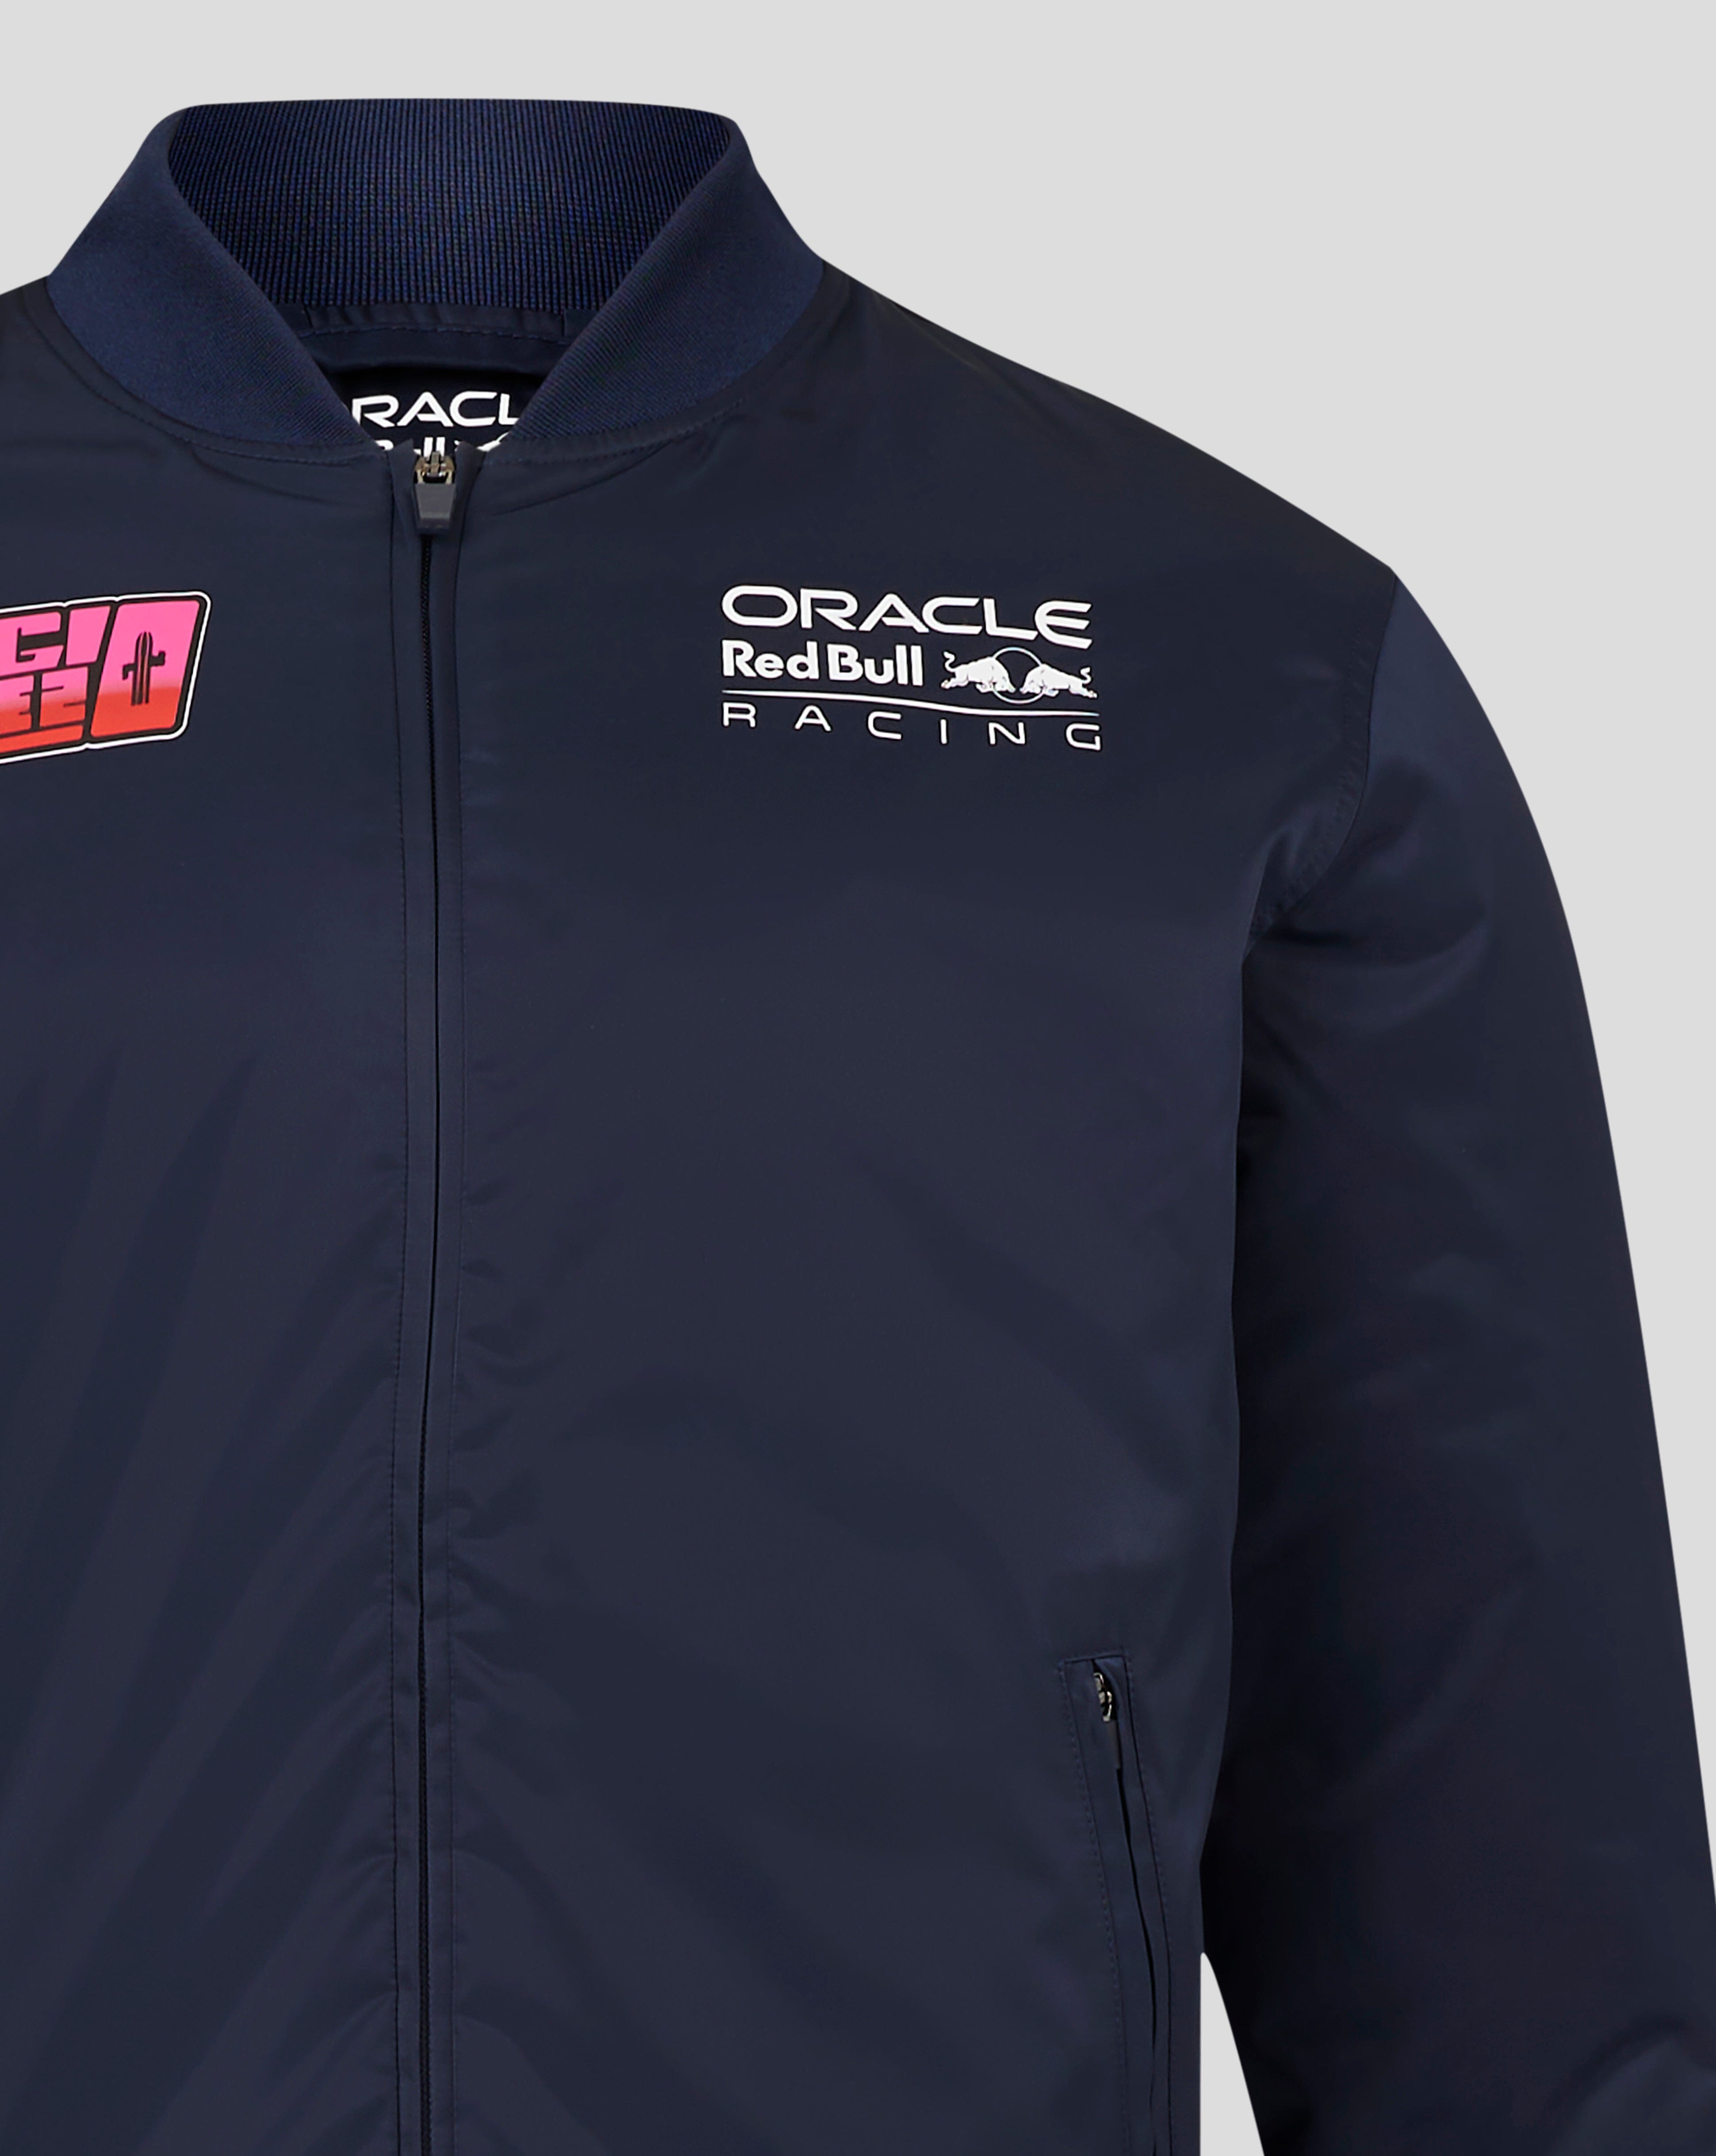 Red Bull Racing F1 Sergio "Checo" Perez Special Edition Mexico GP Track Jacket -Navy